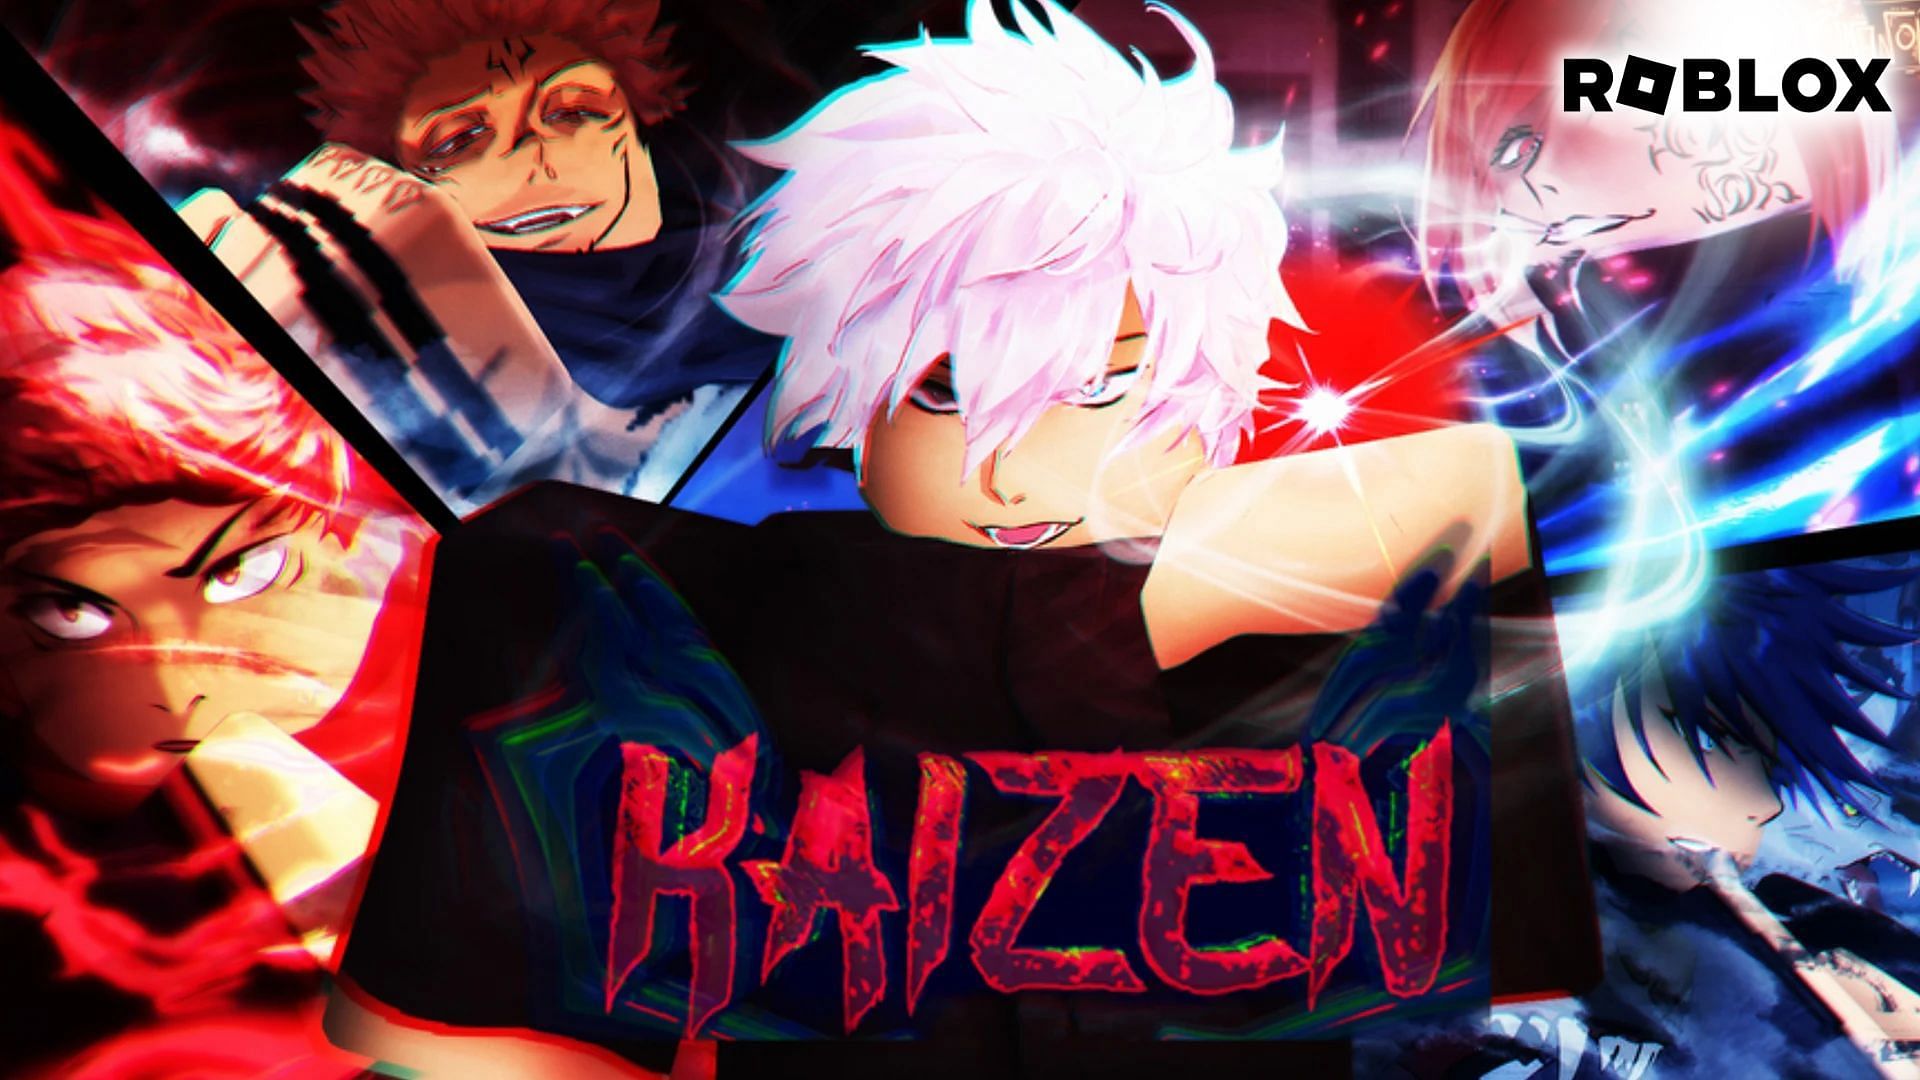 The complete guide to Kaizen (Image via Roblox and Sportskeeda)